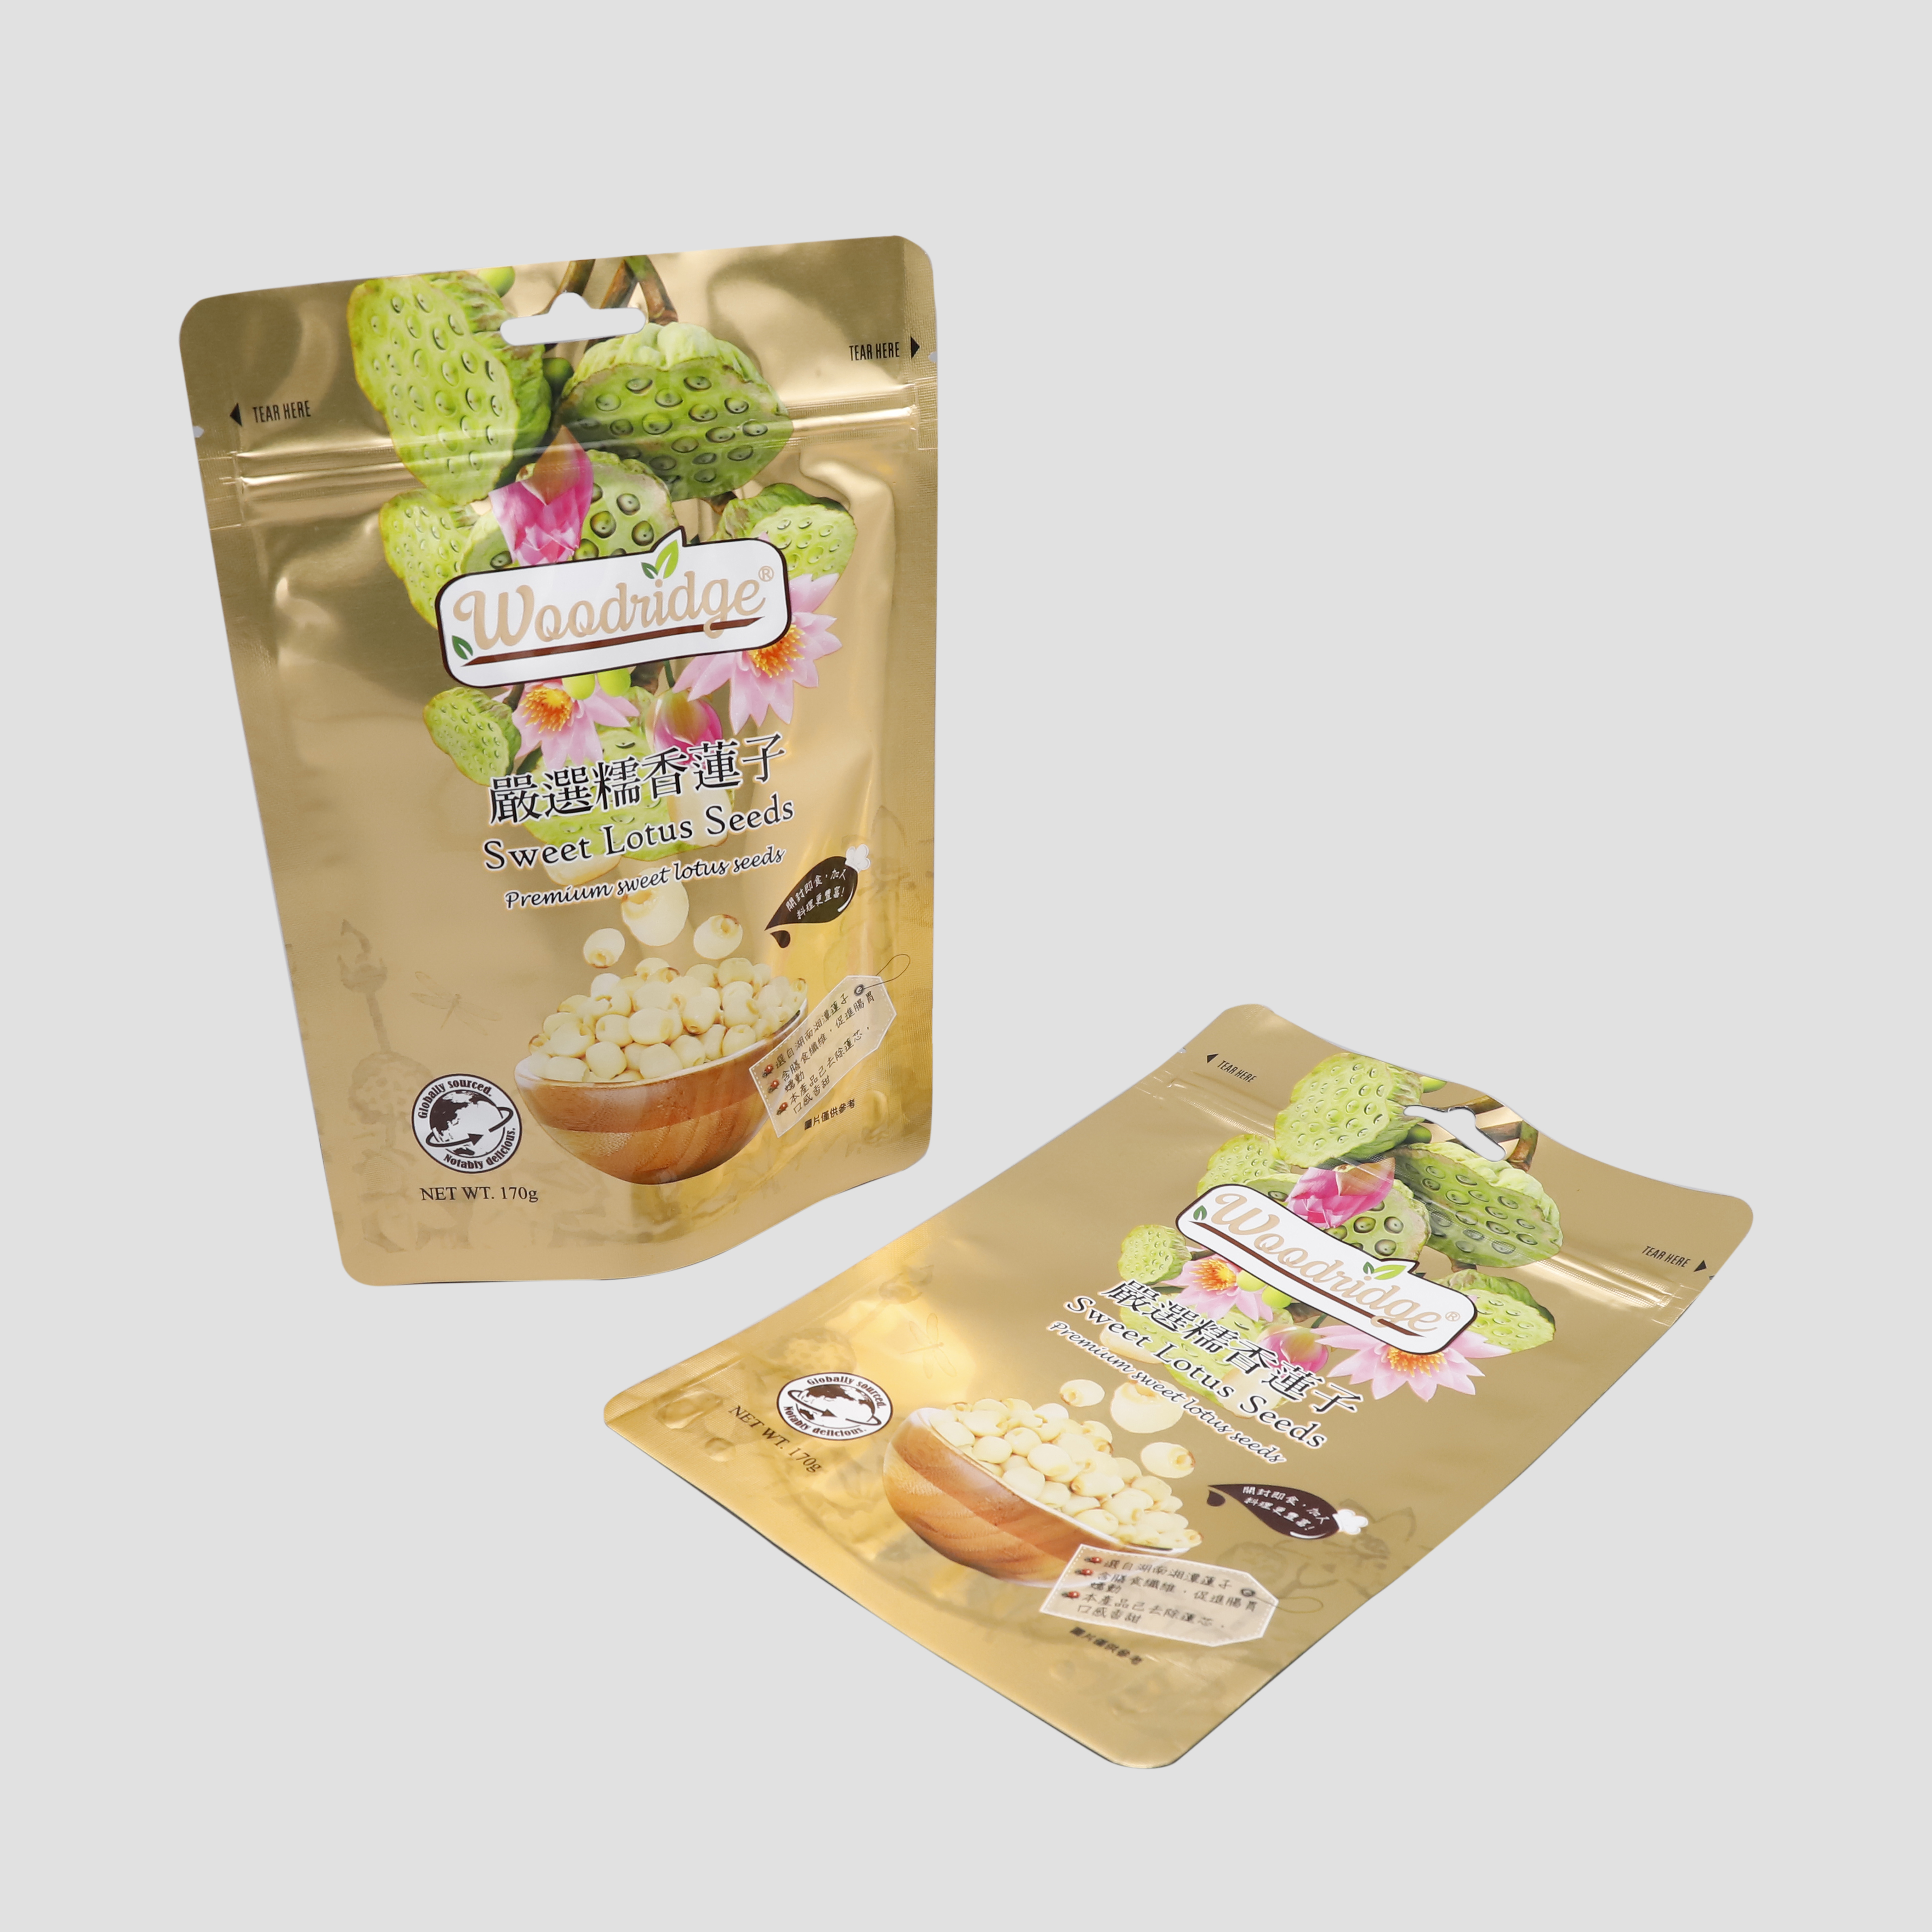 100% Bio-degradable Open and Close BAG/Pouch